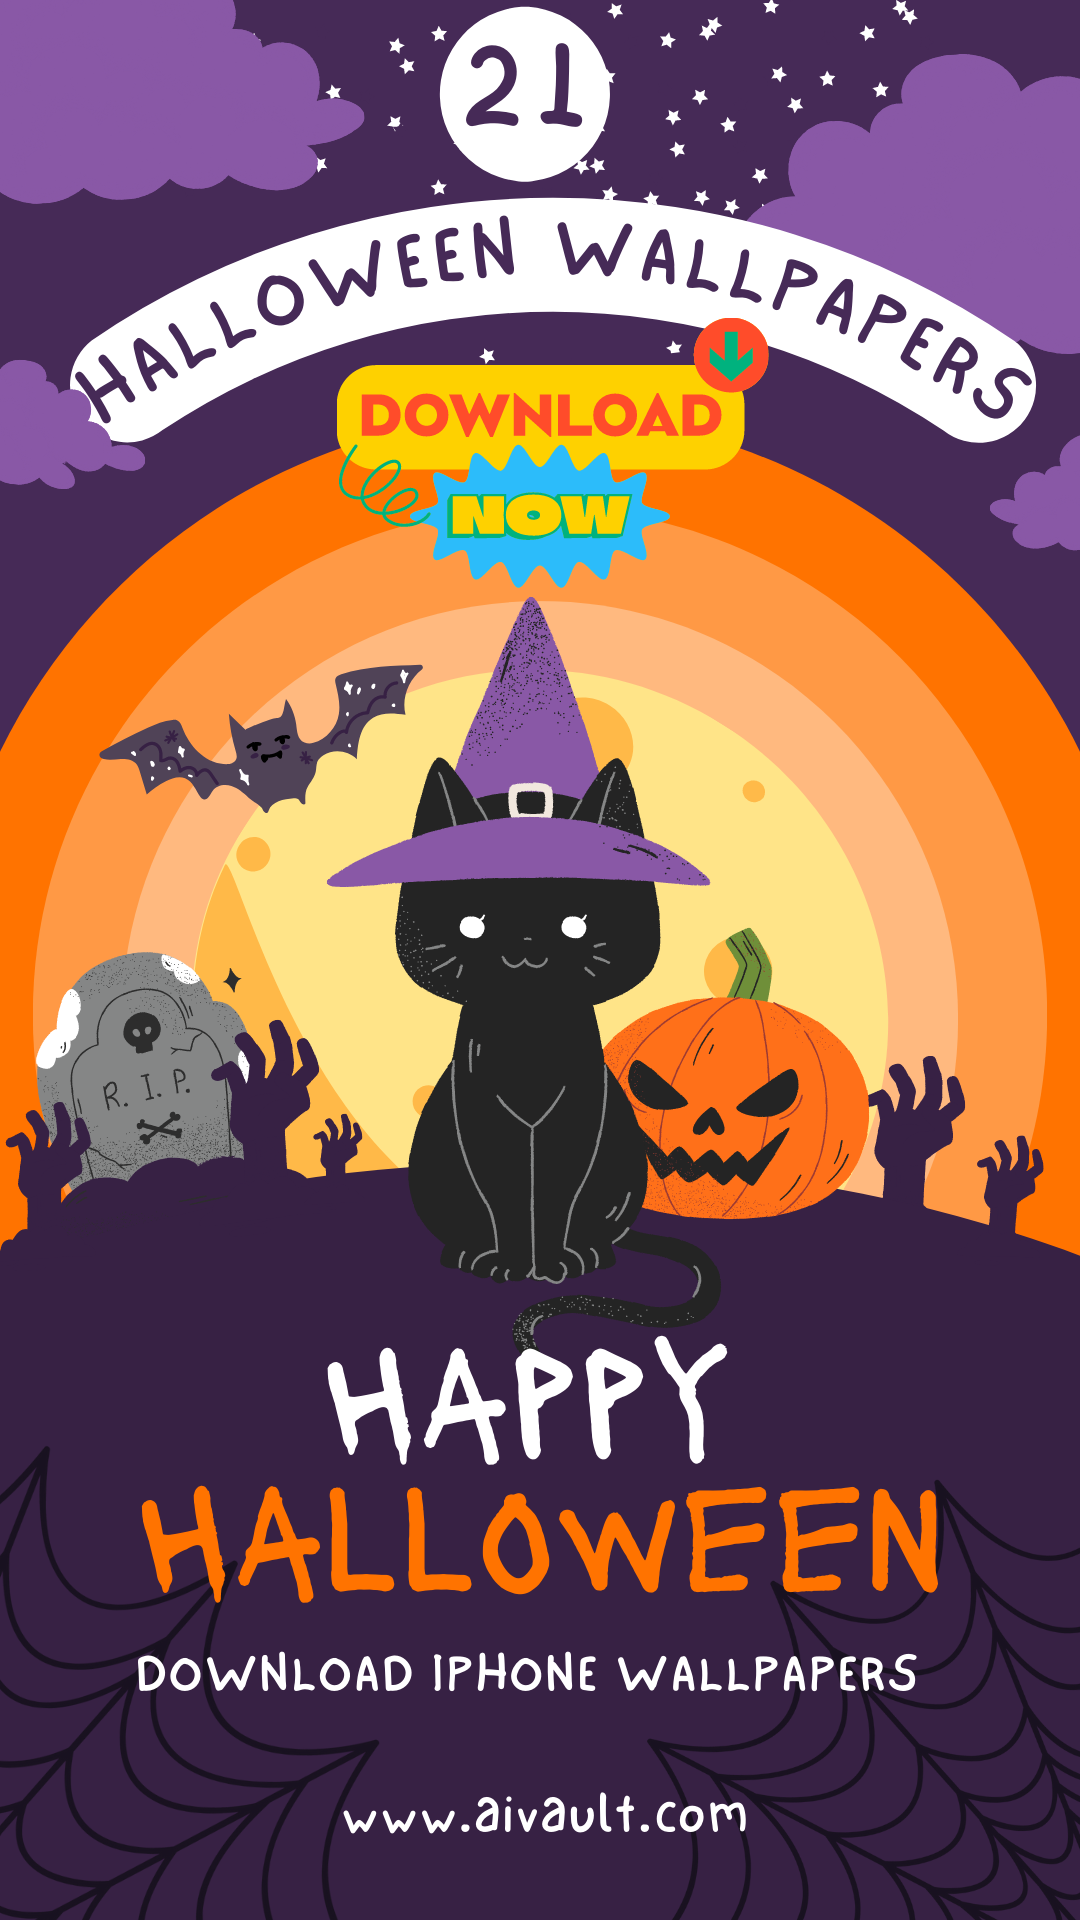 Halloween Wallpaper App for iPhone, iPod touch, and iPad.